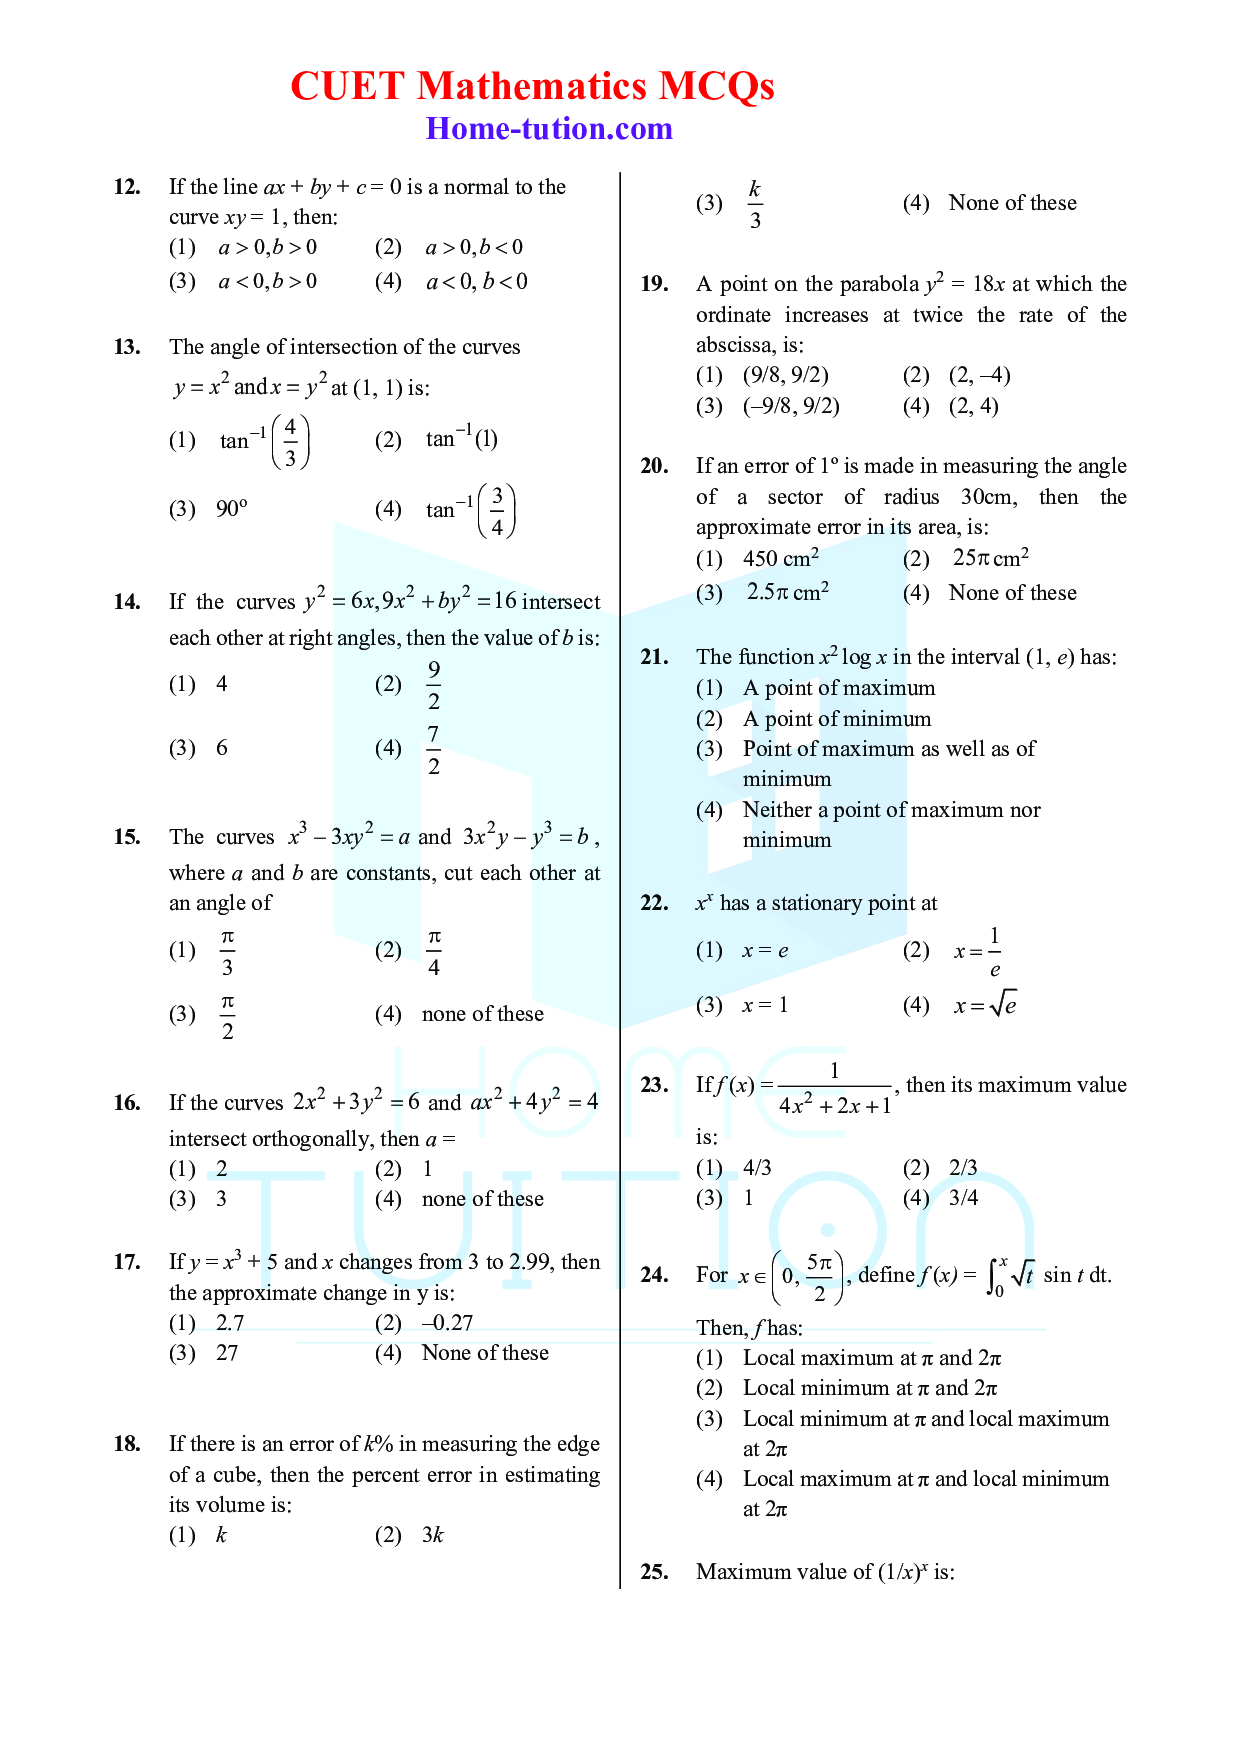 CUET MCQ Questions For Maths Chapter-1 Application of Derivative